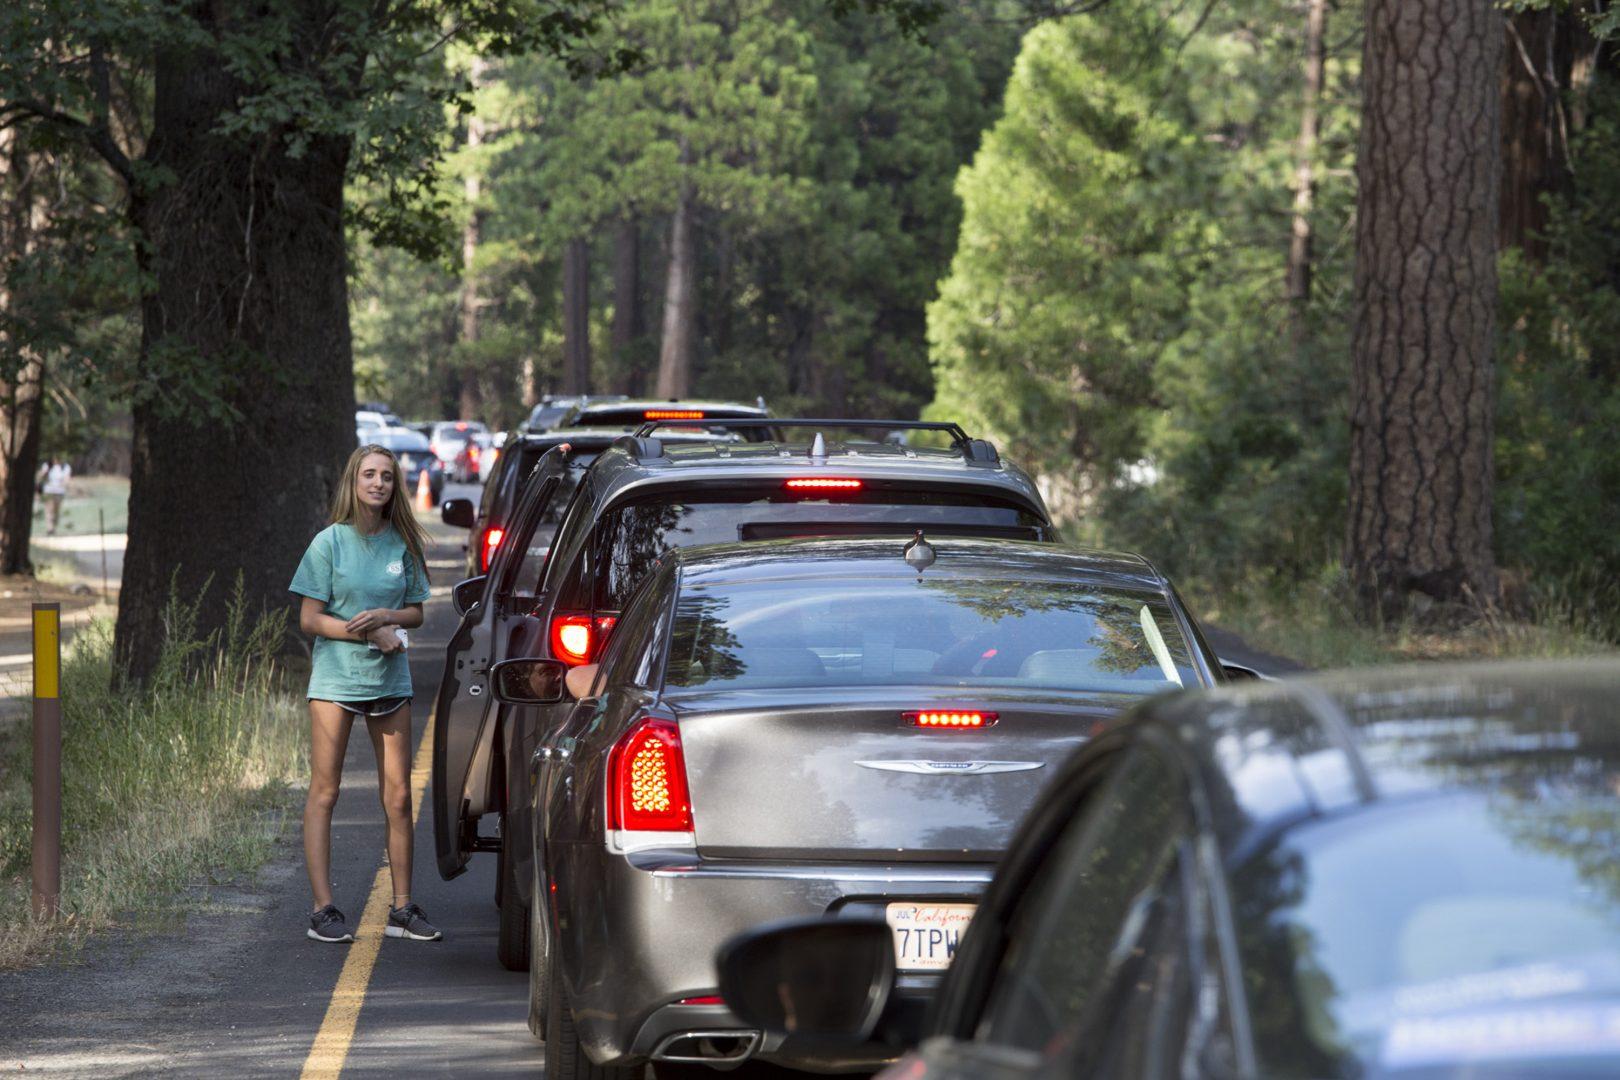 Traffic+is+at+a+standstill+and+visitors+are+out+of+their+cars+on+the+valley+floor+while+a+bus+lane+is+empty+and+off-limits+to+visitors+at+Yosemite+National+Park+July+15+2017.+%28Brian+vander+Brug%2FLos+Angeles+Times%2FTNS%29